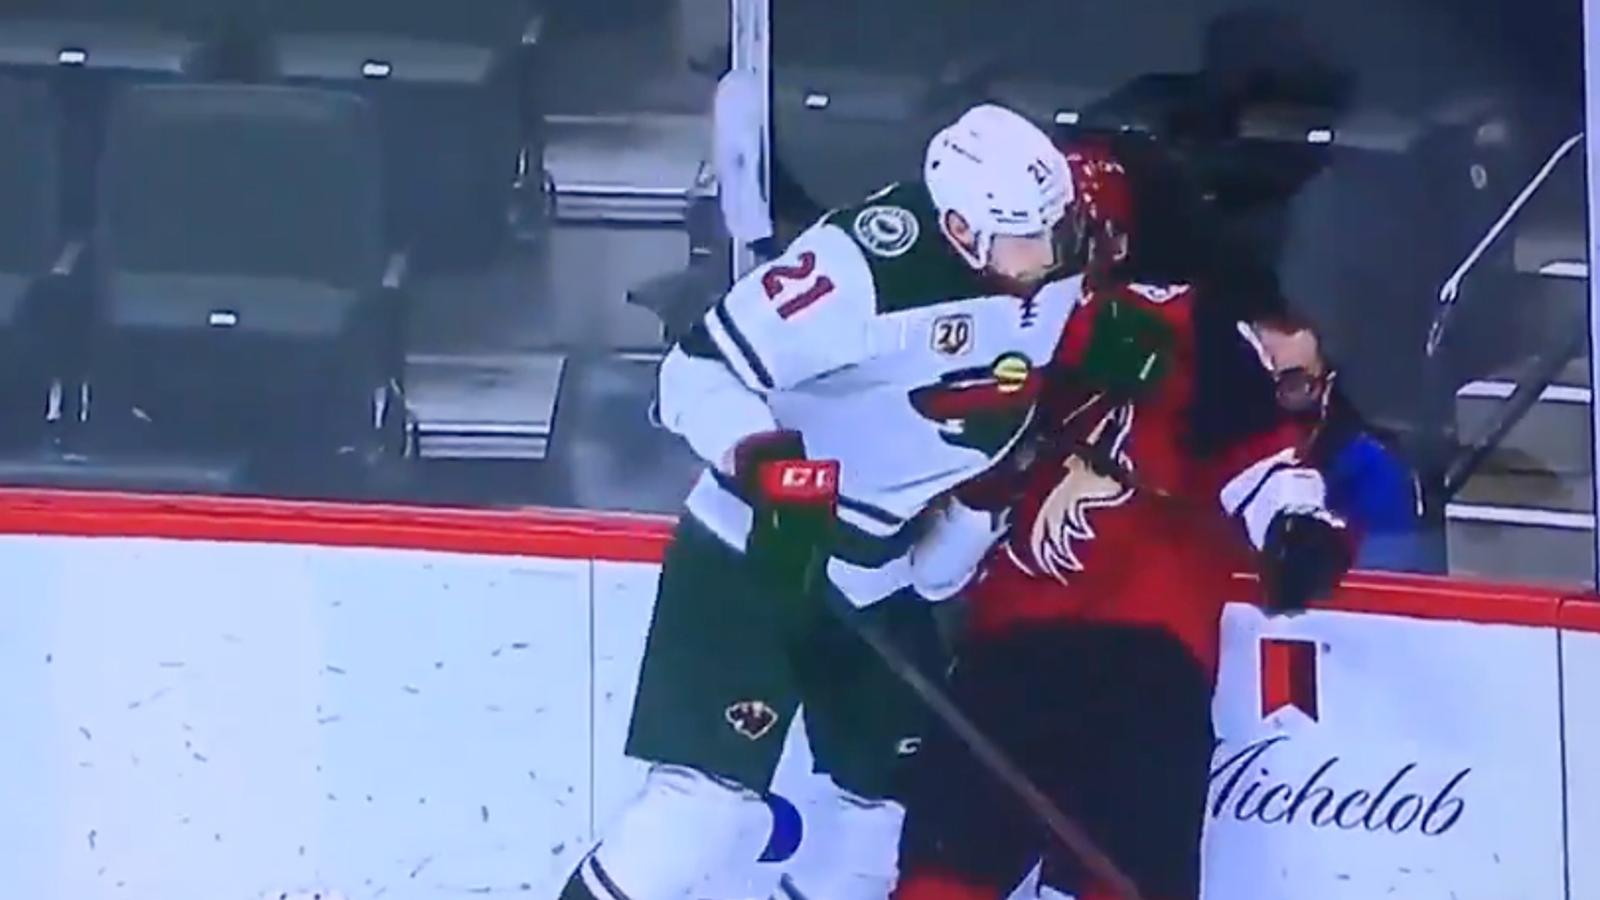 NHL suspends Wild’s Carson Soucy for charging Conor Garland